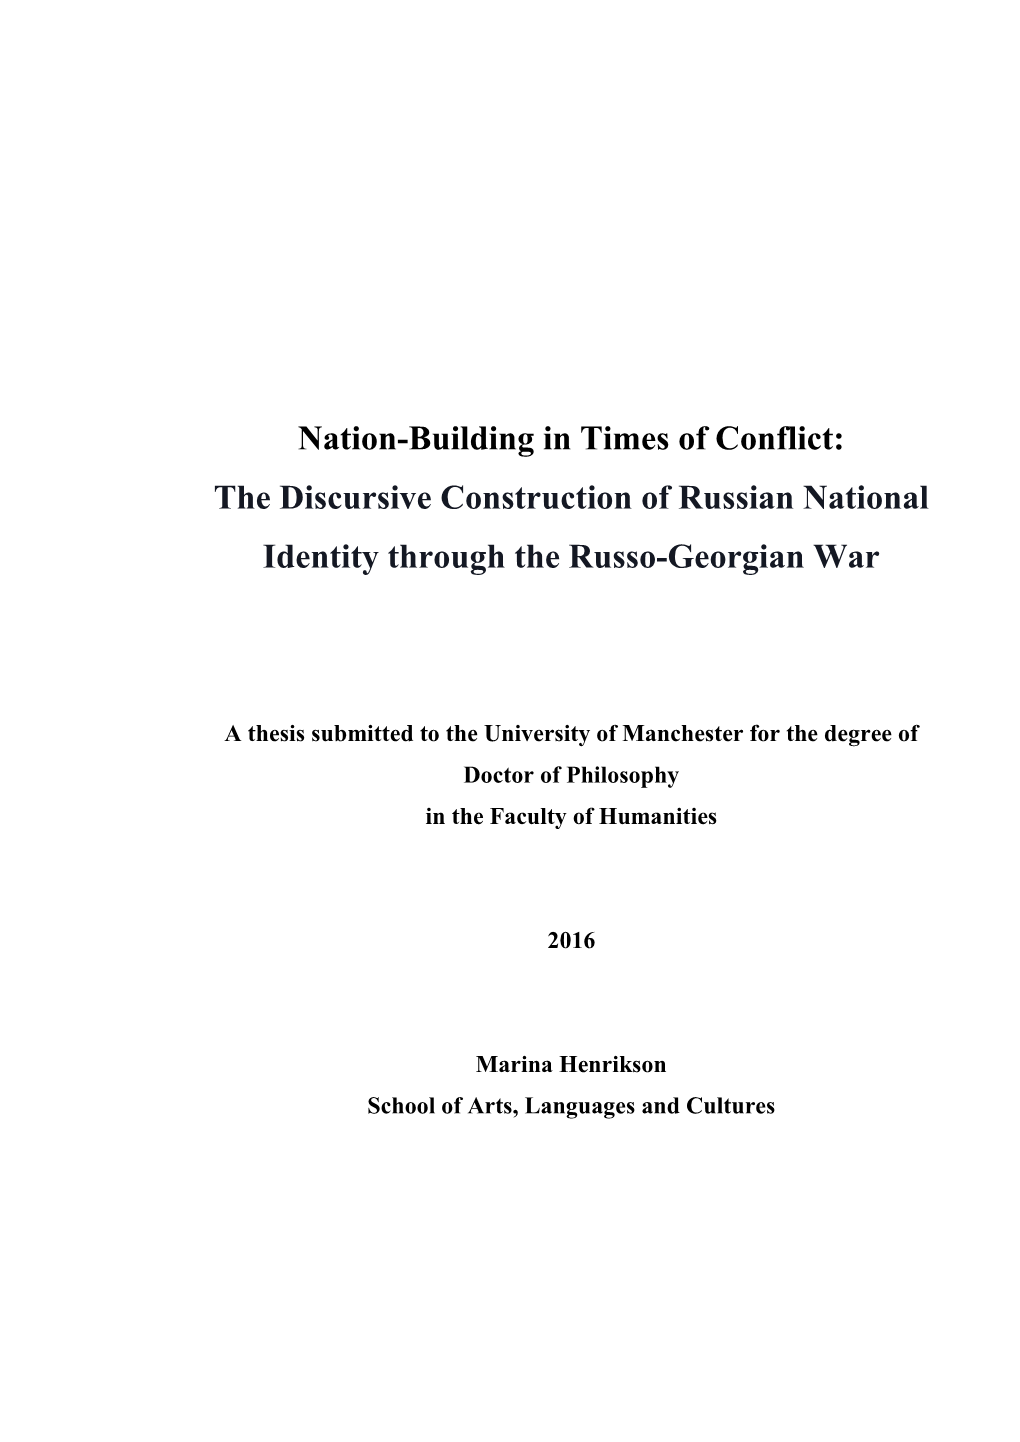 The Discursive Construction of Russian National Identity Through the Russo-Georgian War